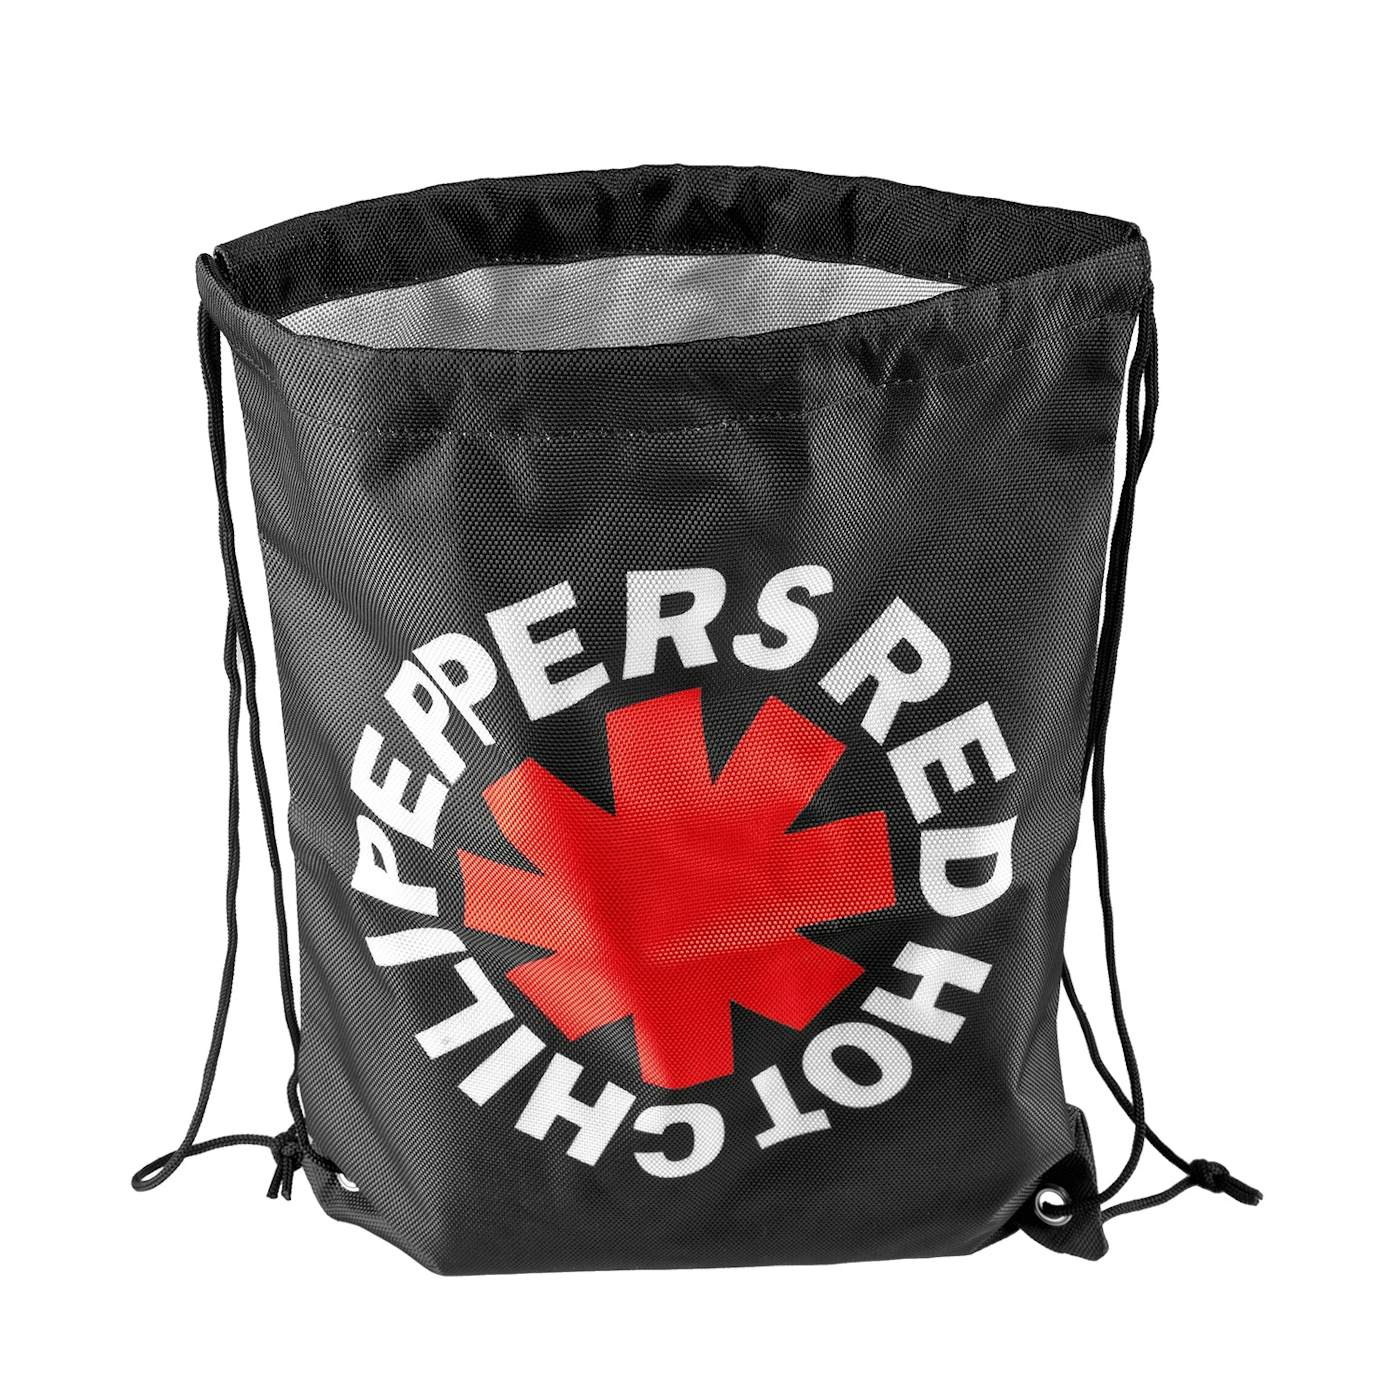 Rocksax Red Hot Chili Peppers Gym Bag - Asterix